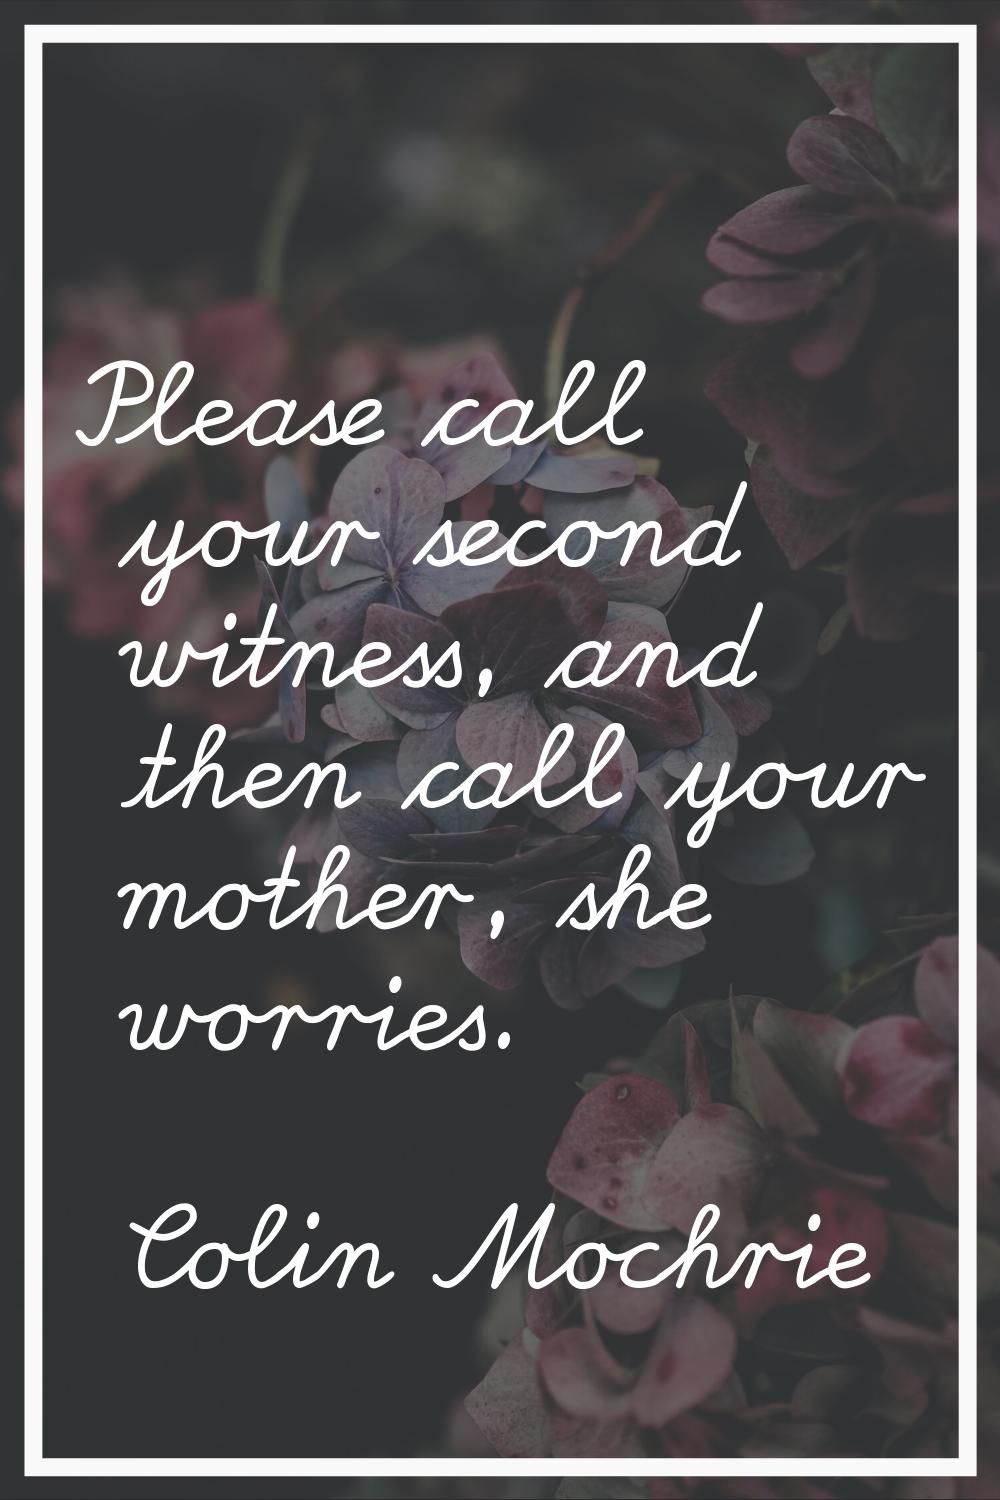 Please call your second witness, and then call your mother, she worries.